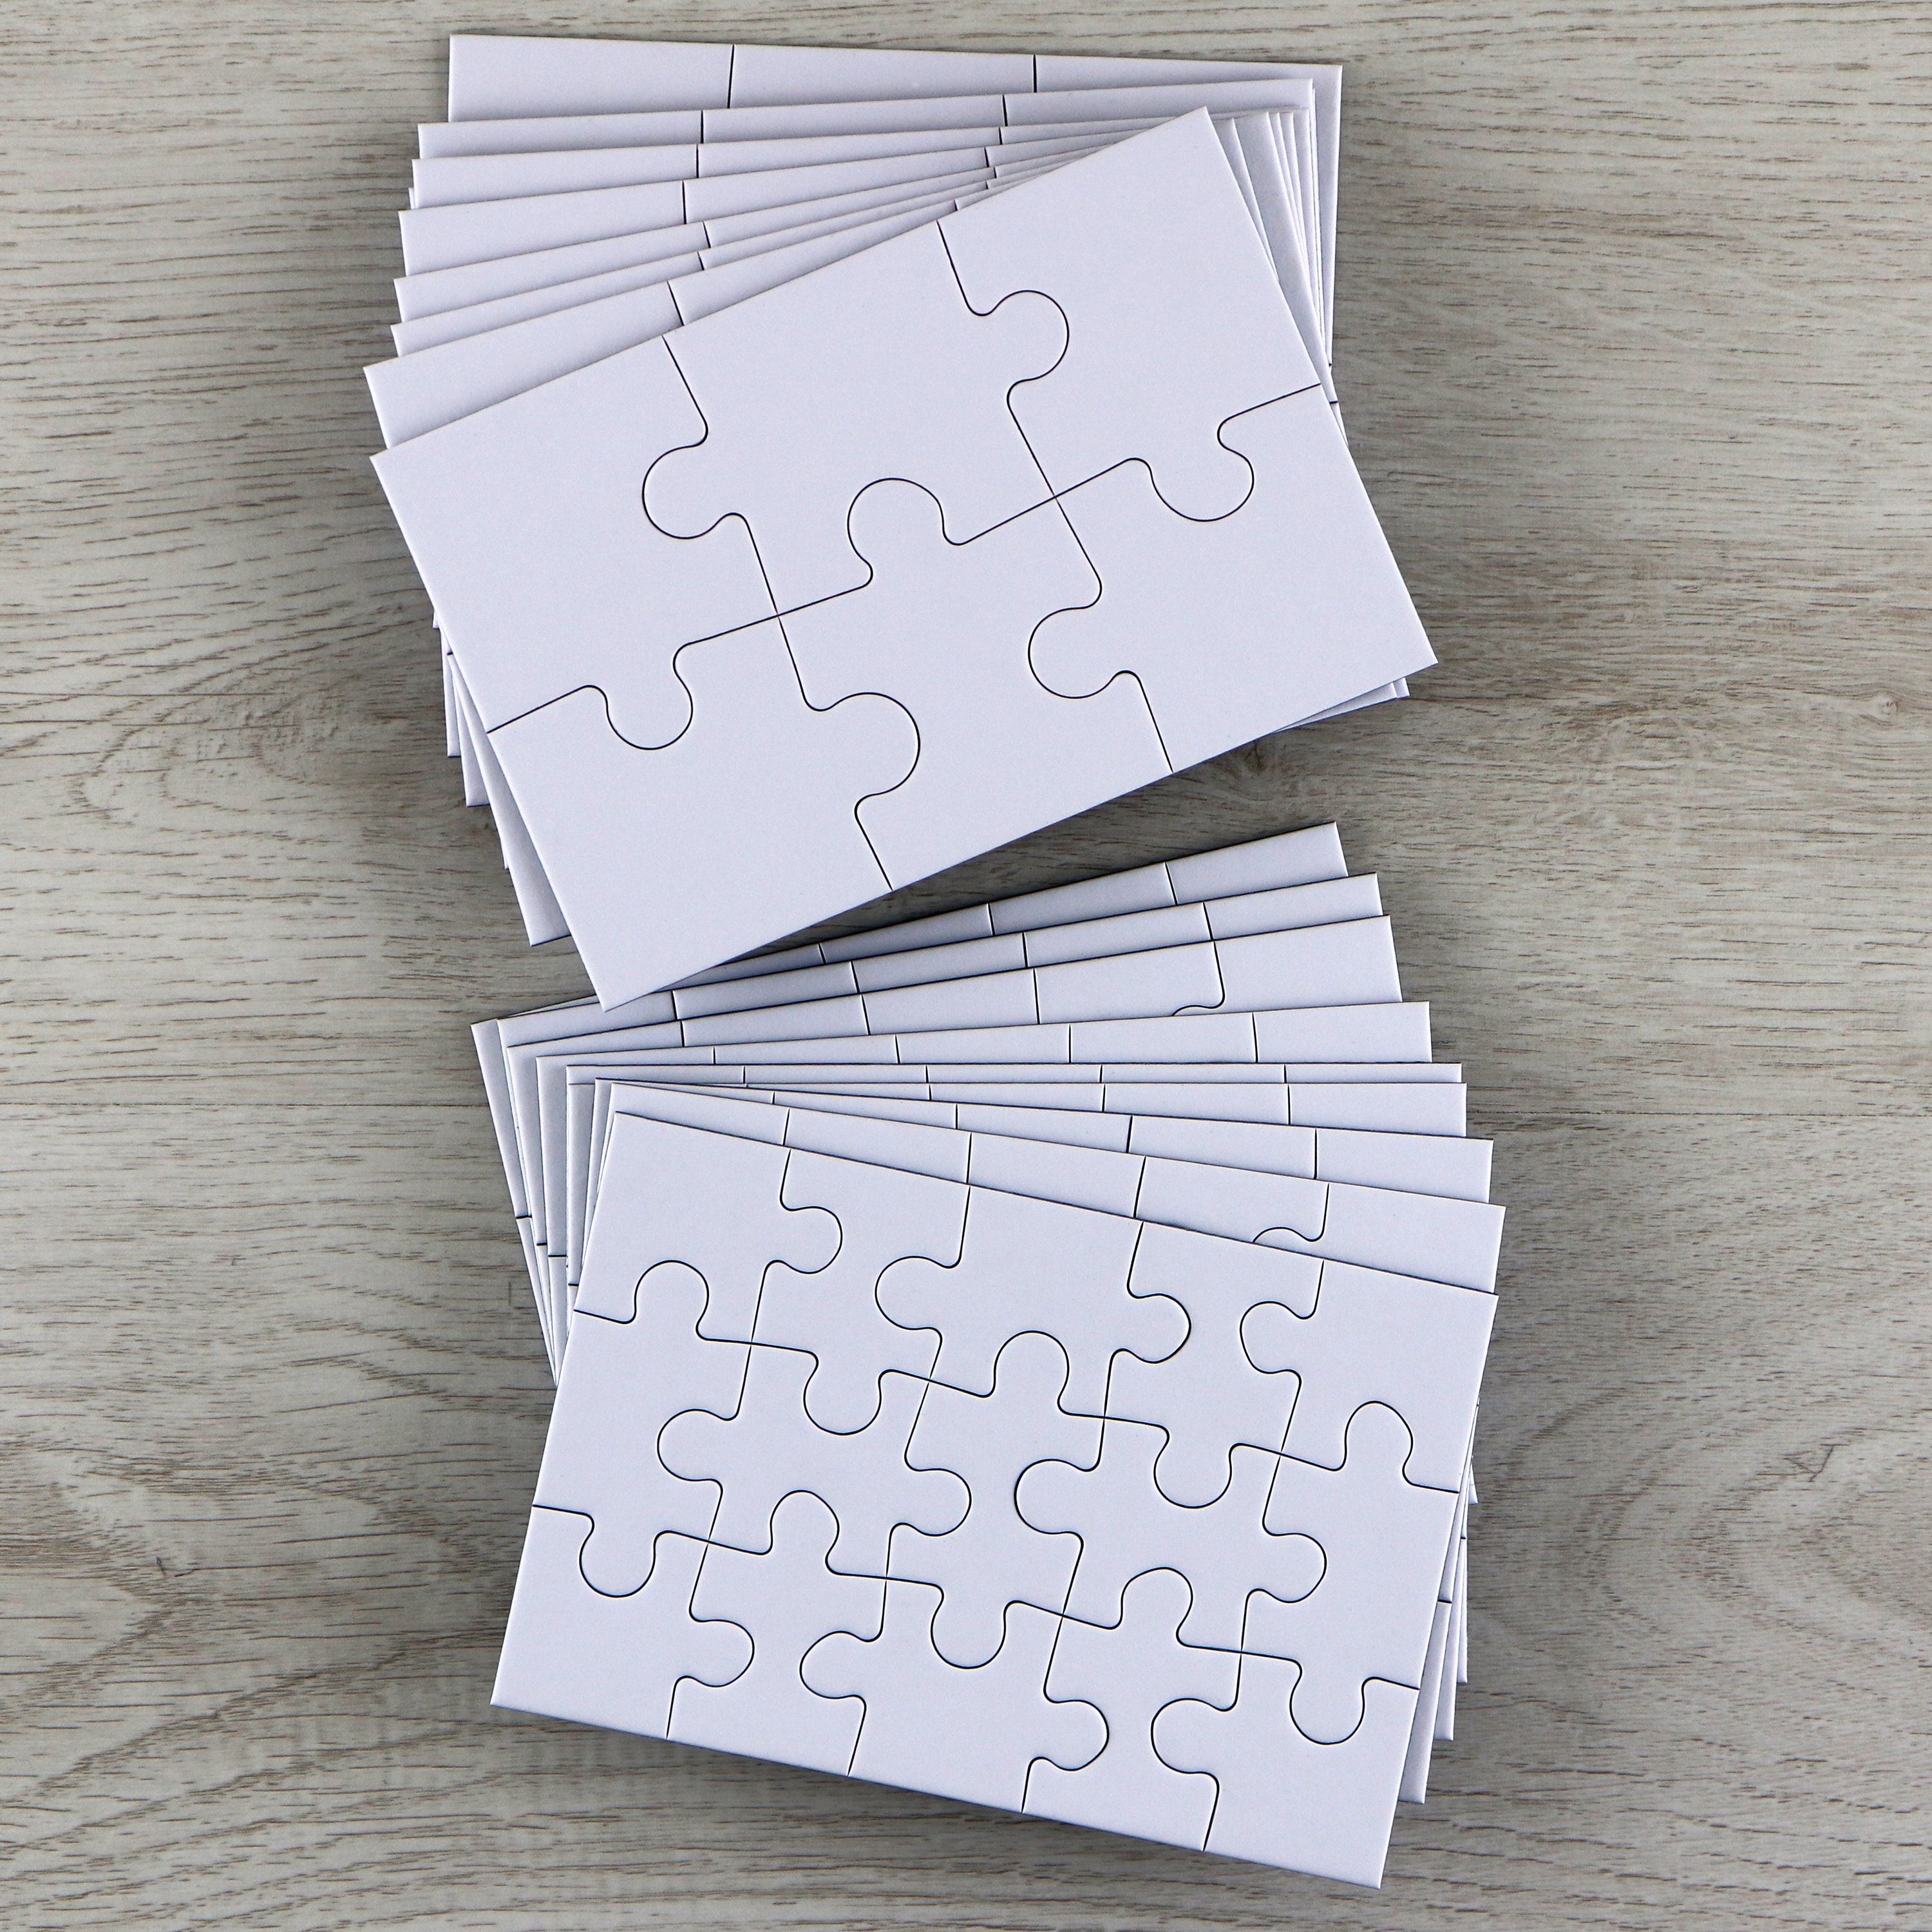 Kids Drawing Blank Jigsaw Puzzles Pack of 10 White Puzzles 6 or 15 Pieces  With Blank Envelopes Puzzles for Drawing, Writing, Painting 